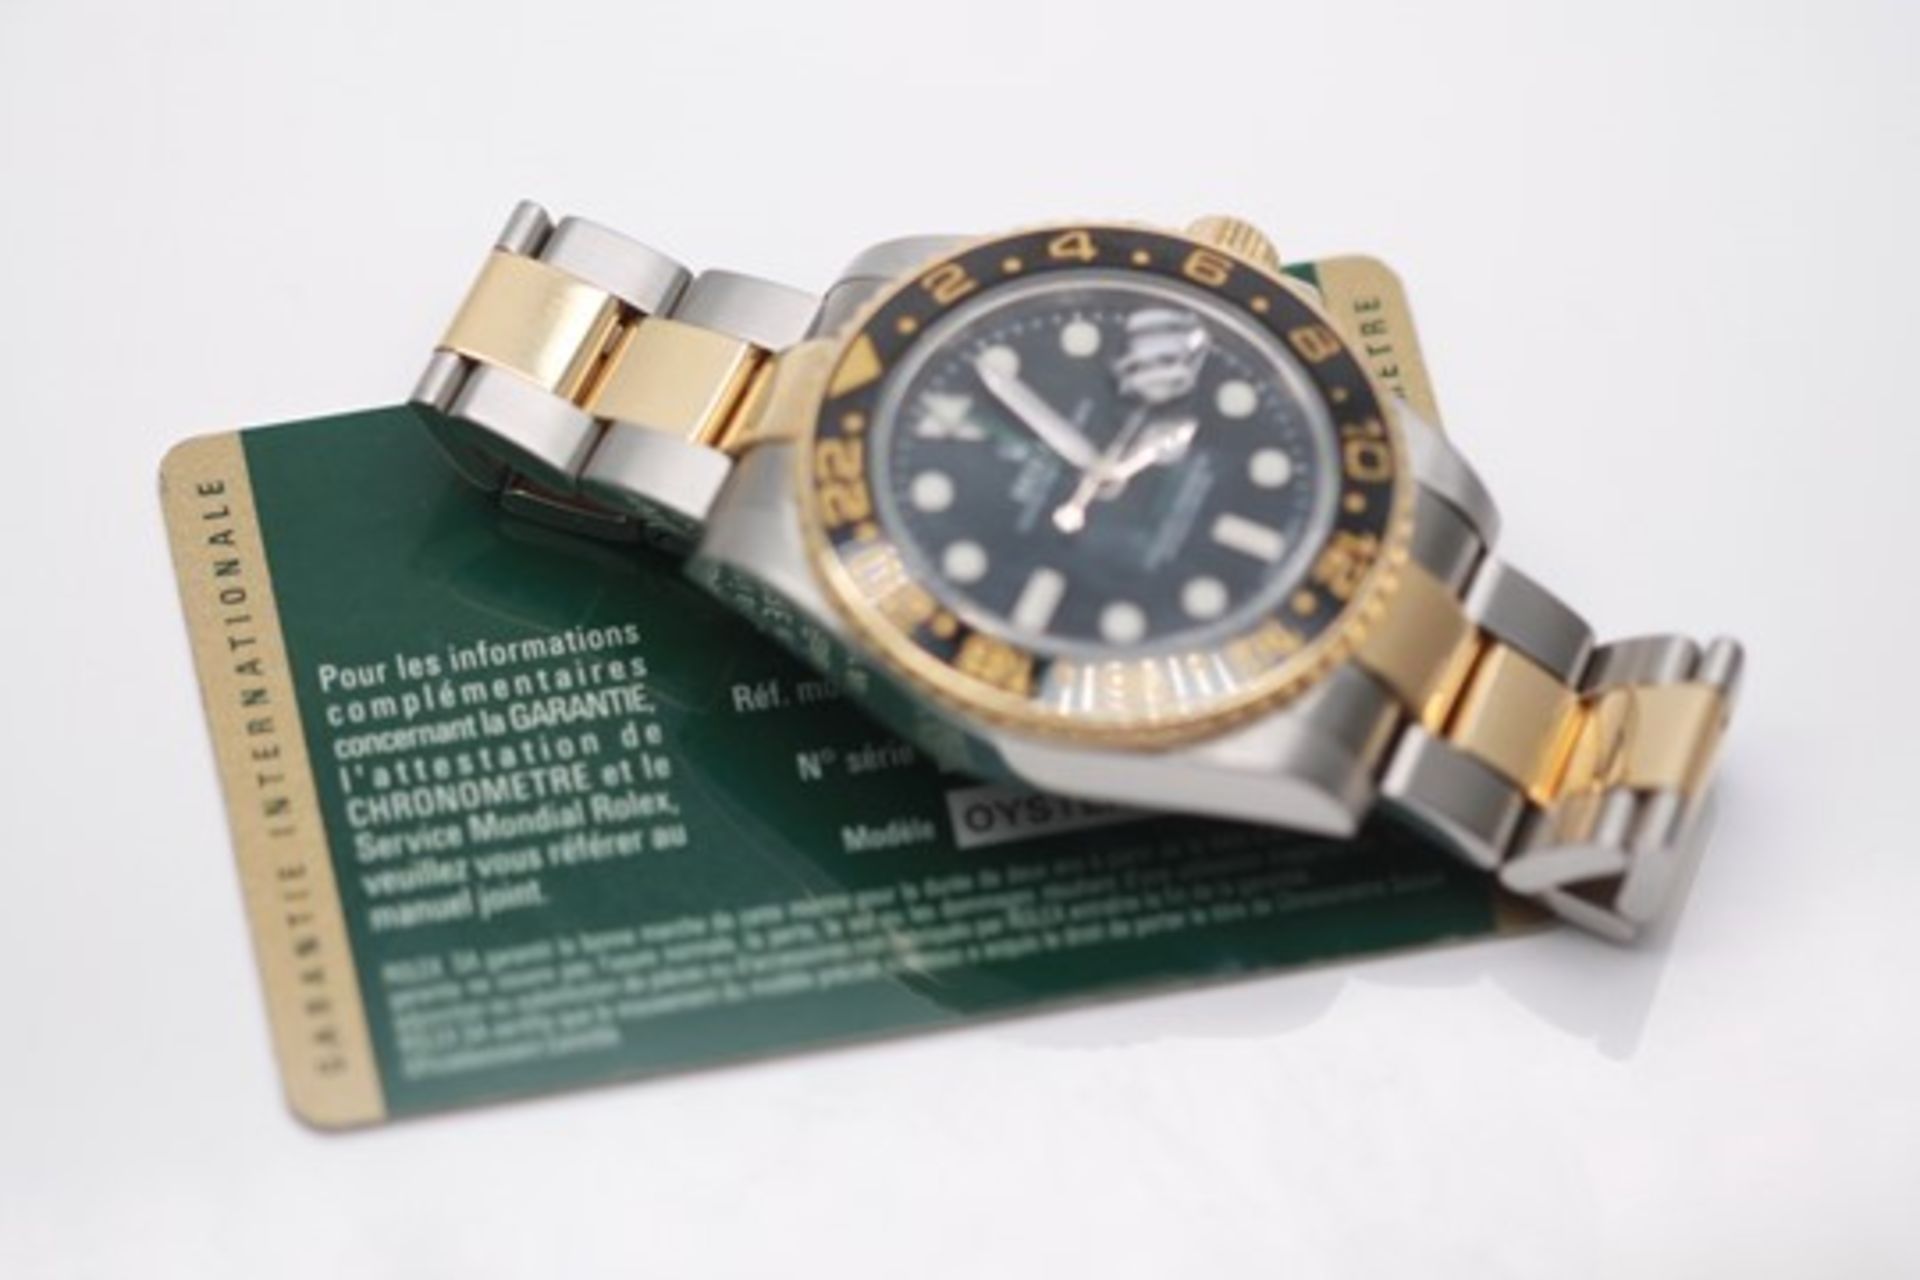 Gents 2008 Rolex, GMT Master Ii Bi Metal With Oyster Strap ***Reserve lowered 19.6.18 at 11:05*** - Image 6 of 6